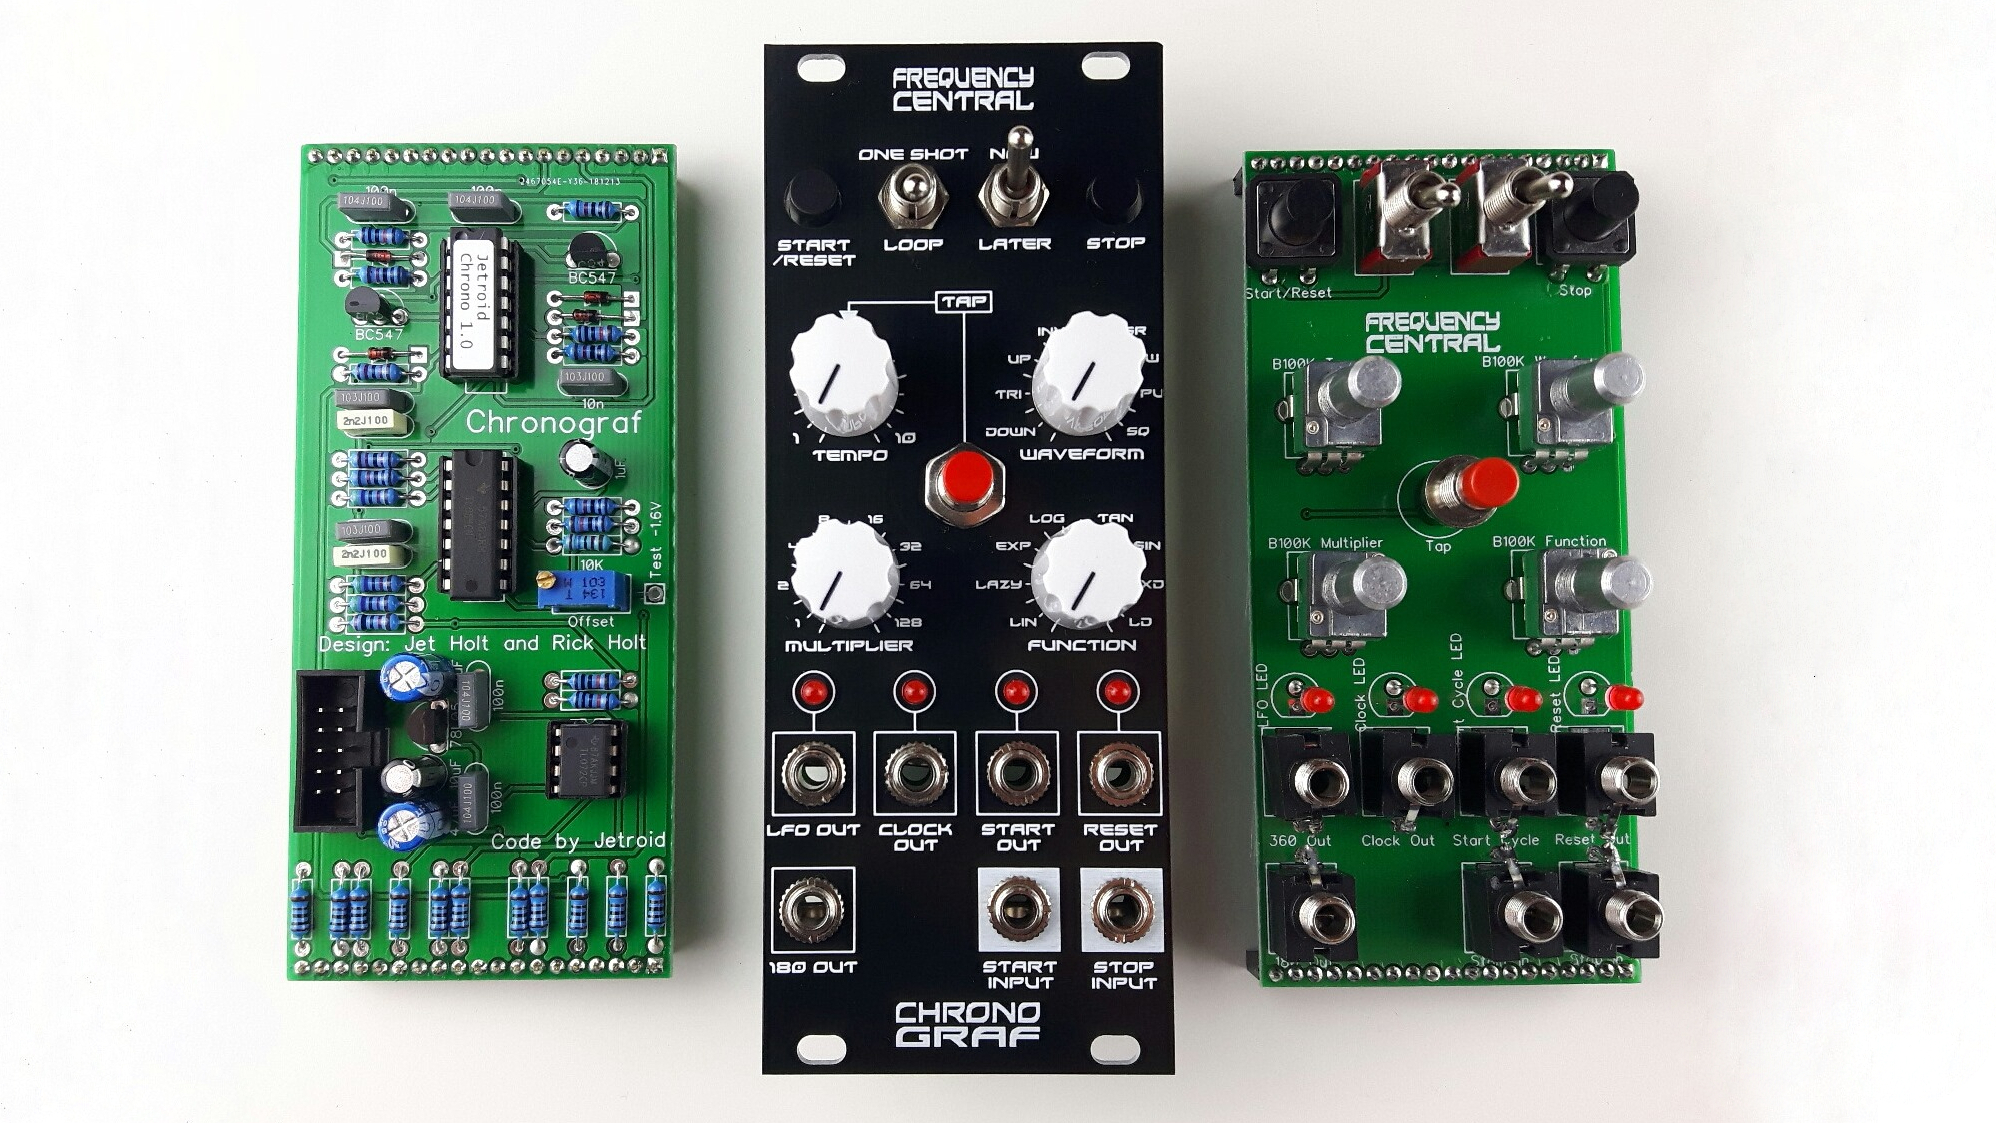 Assembled Frequency Central Chronograf module next to two populated PCBs.